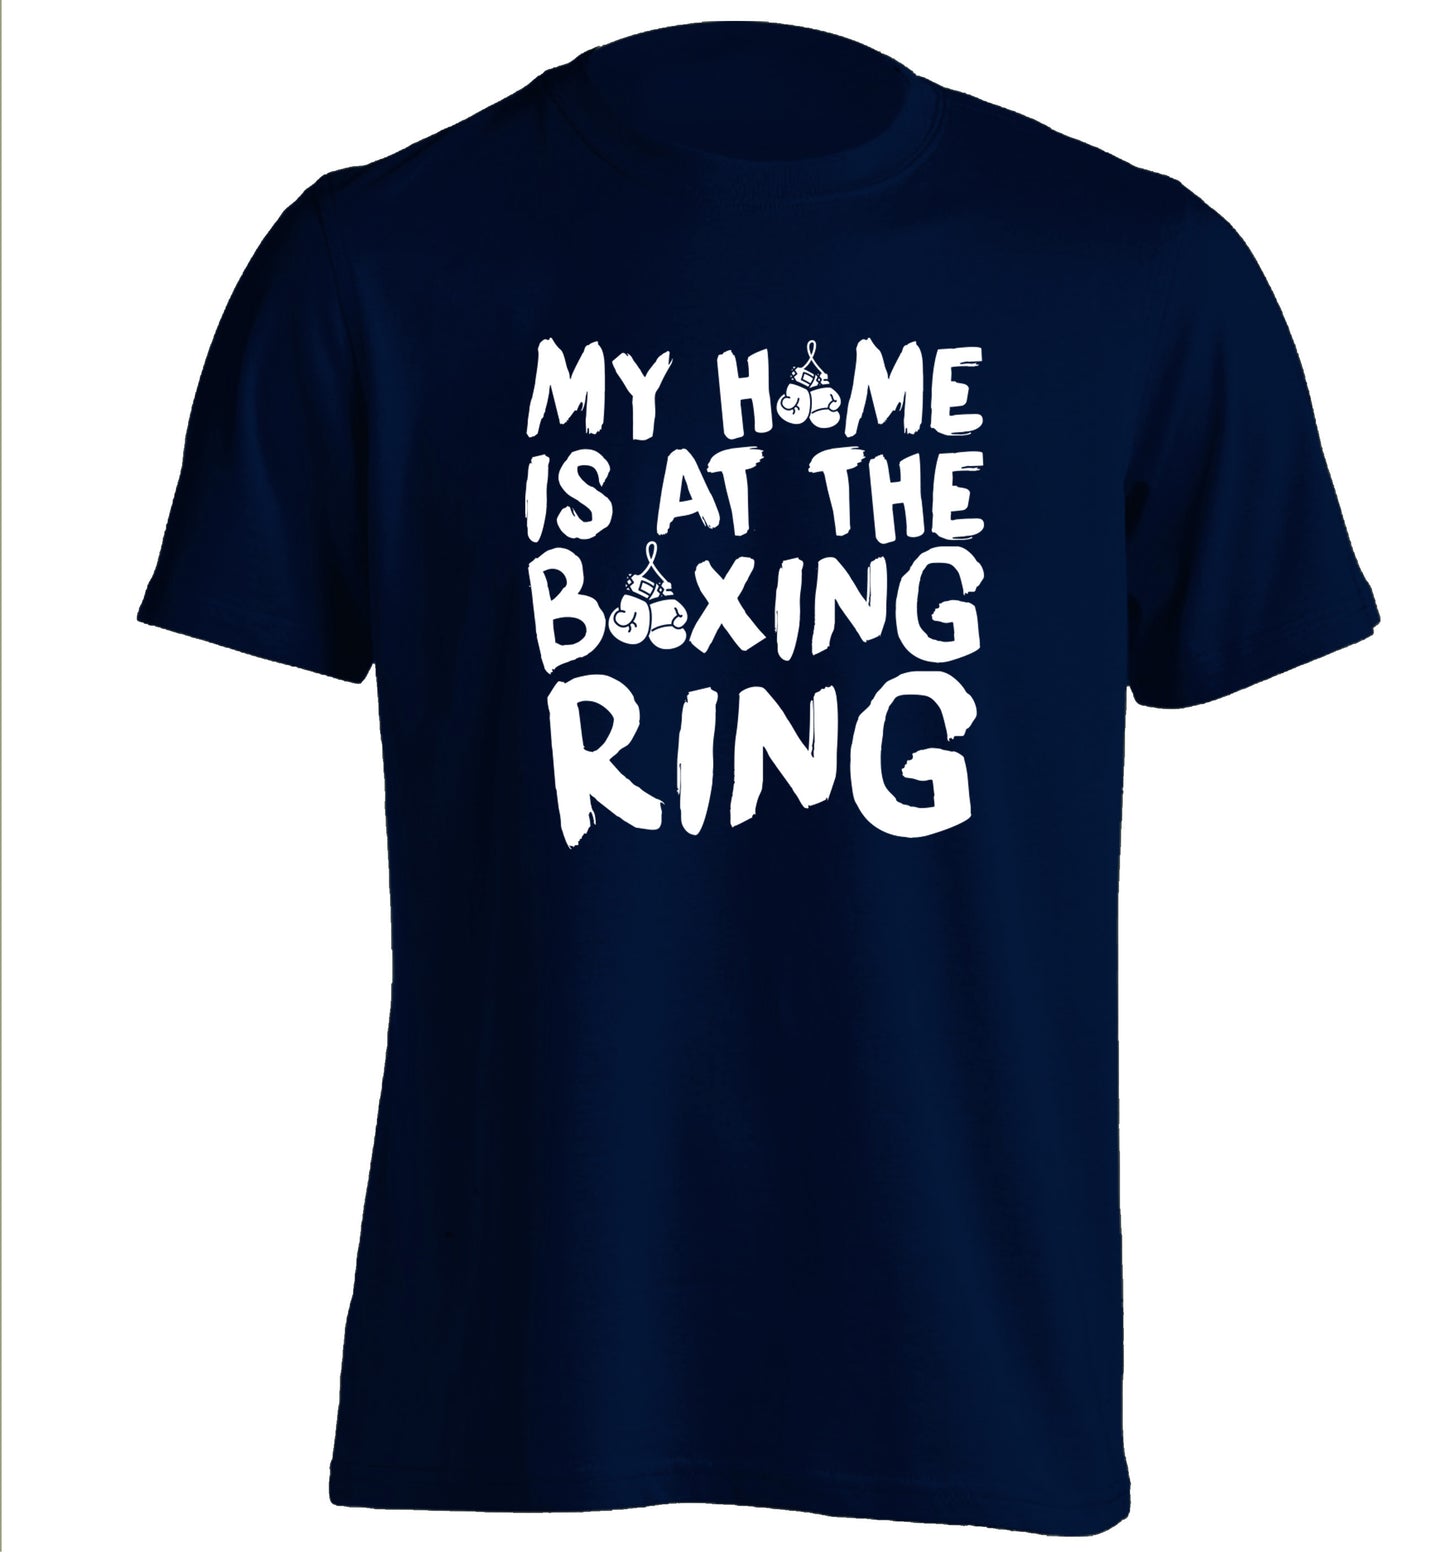 My home is at the boxing ring adults unisex navy Tshirt 2XL